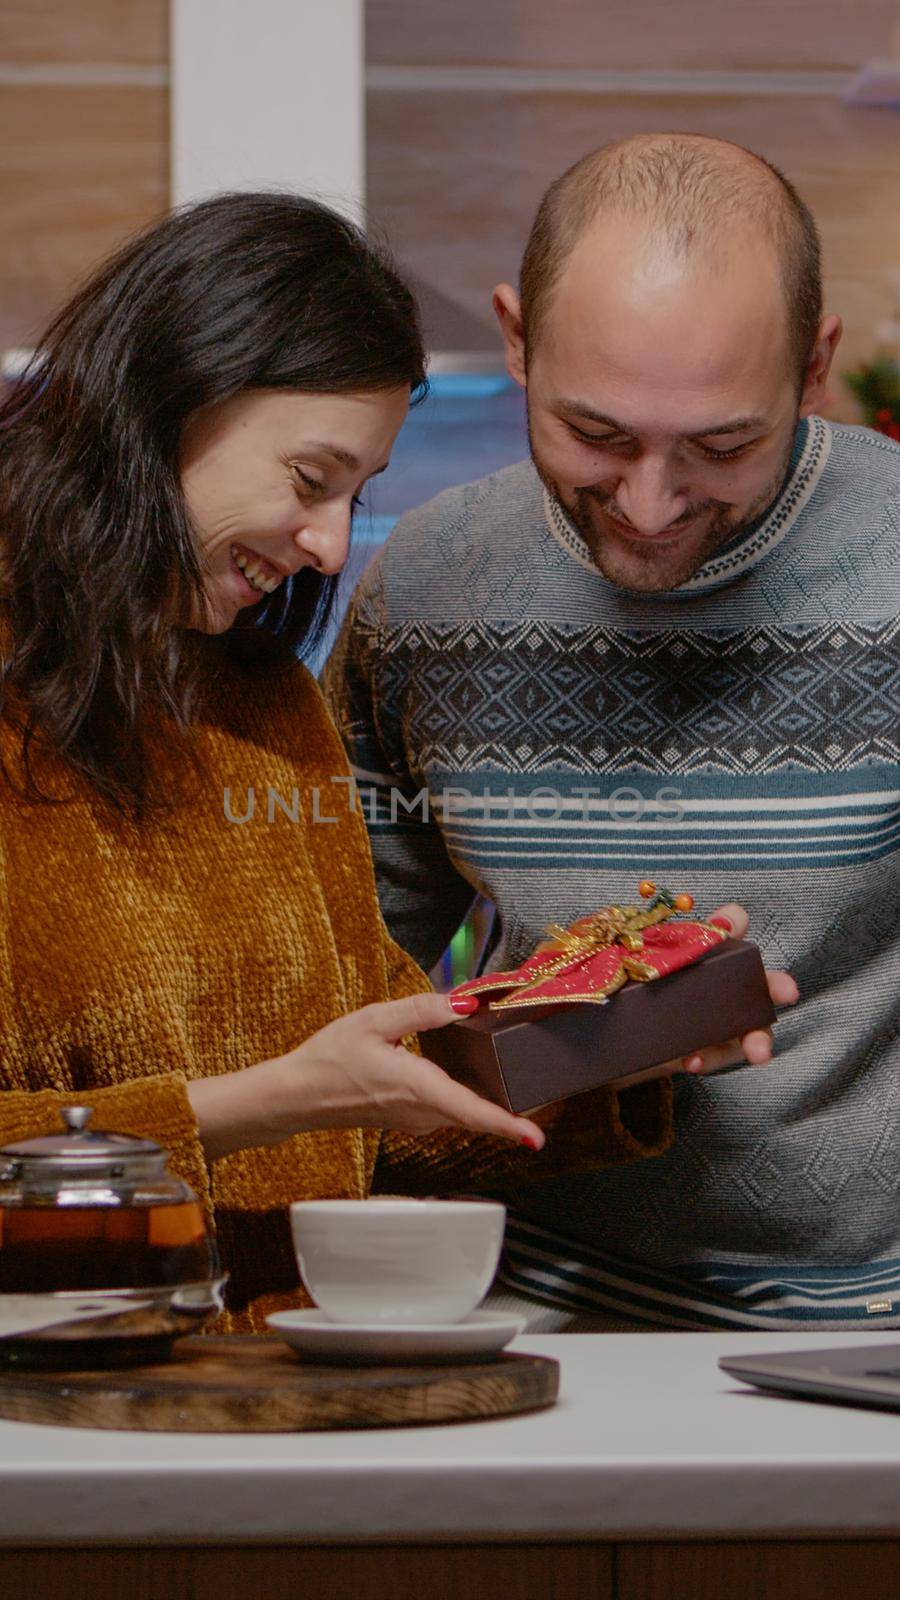 Couple celebrating christmas eve on video call conference with relatives and receiving gifts in holiday decorated kitchen. Man and woman feeling cheerful for seasonal celebration